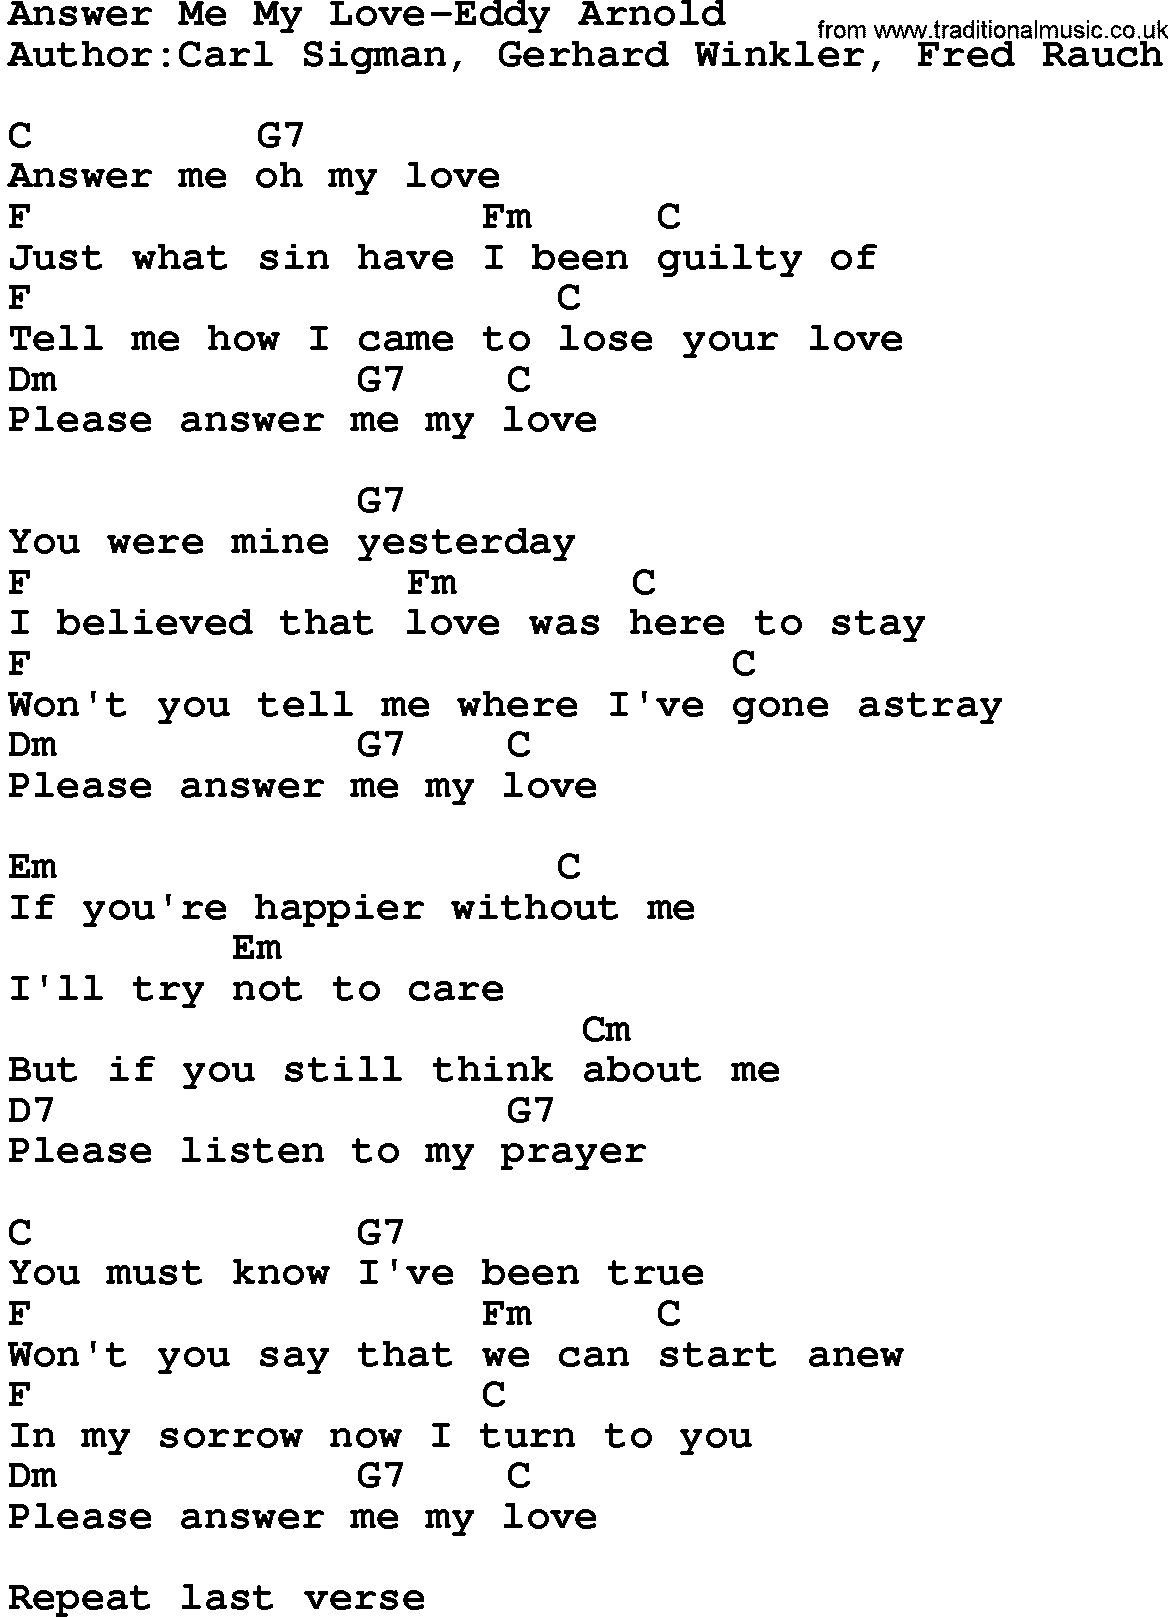 Country music song: Answer Me My Love-Eddy Arnold lyrics and chords